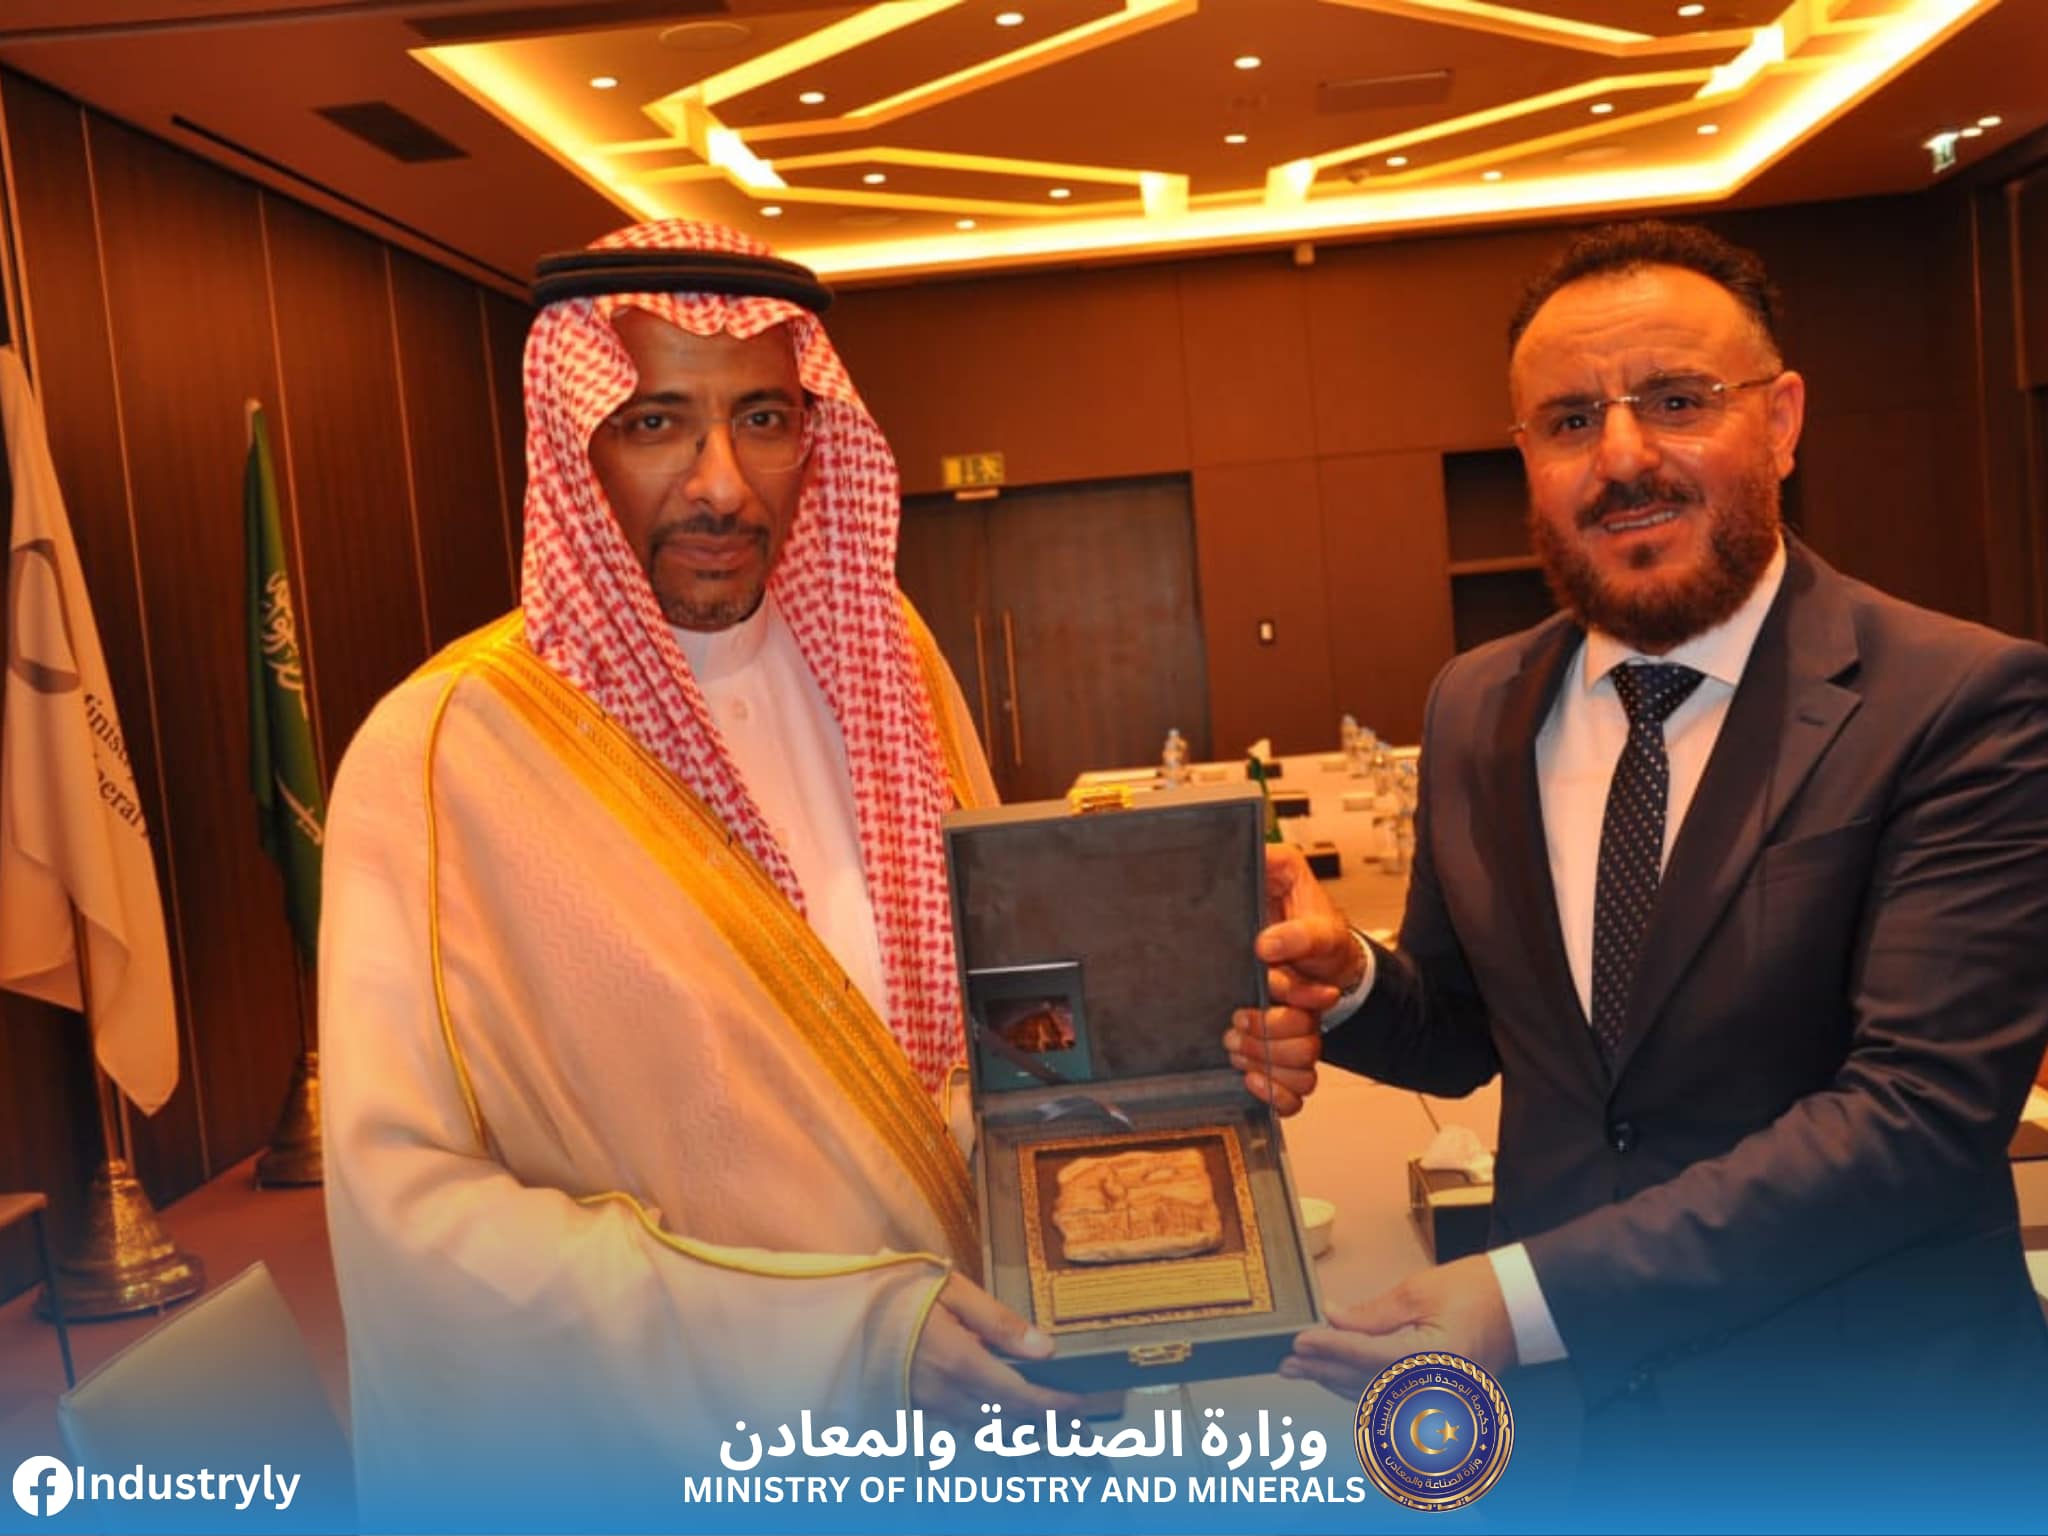 Abu Hessa discusses with his Saudi counterpart ways to strengthen cooperation between the two countries.